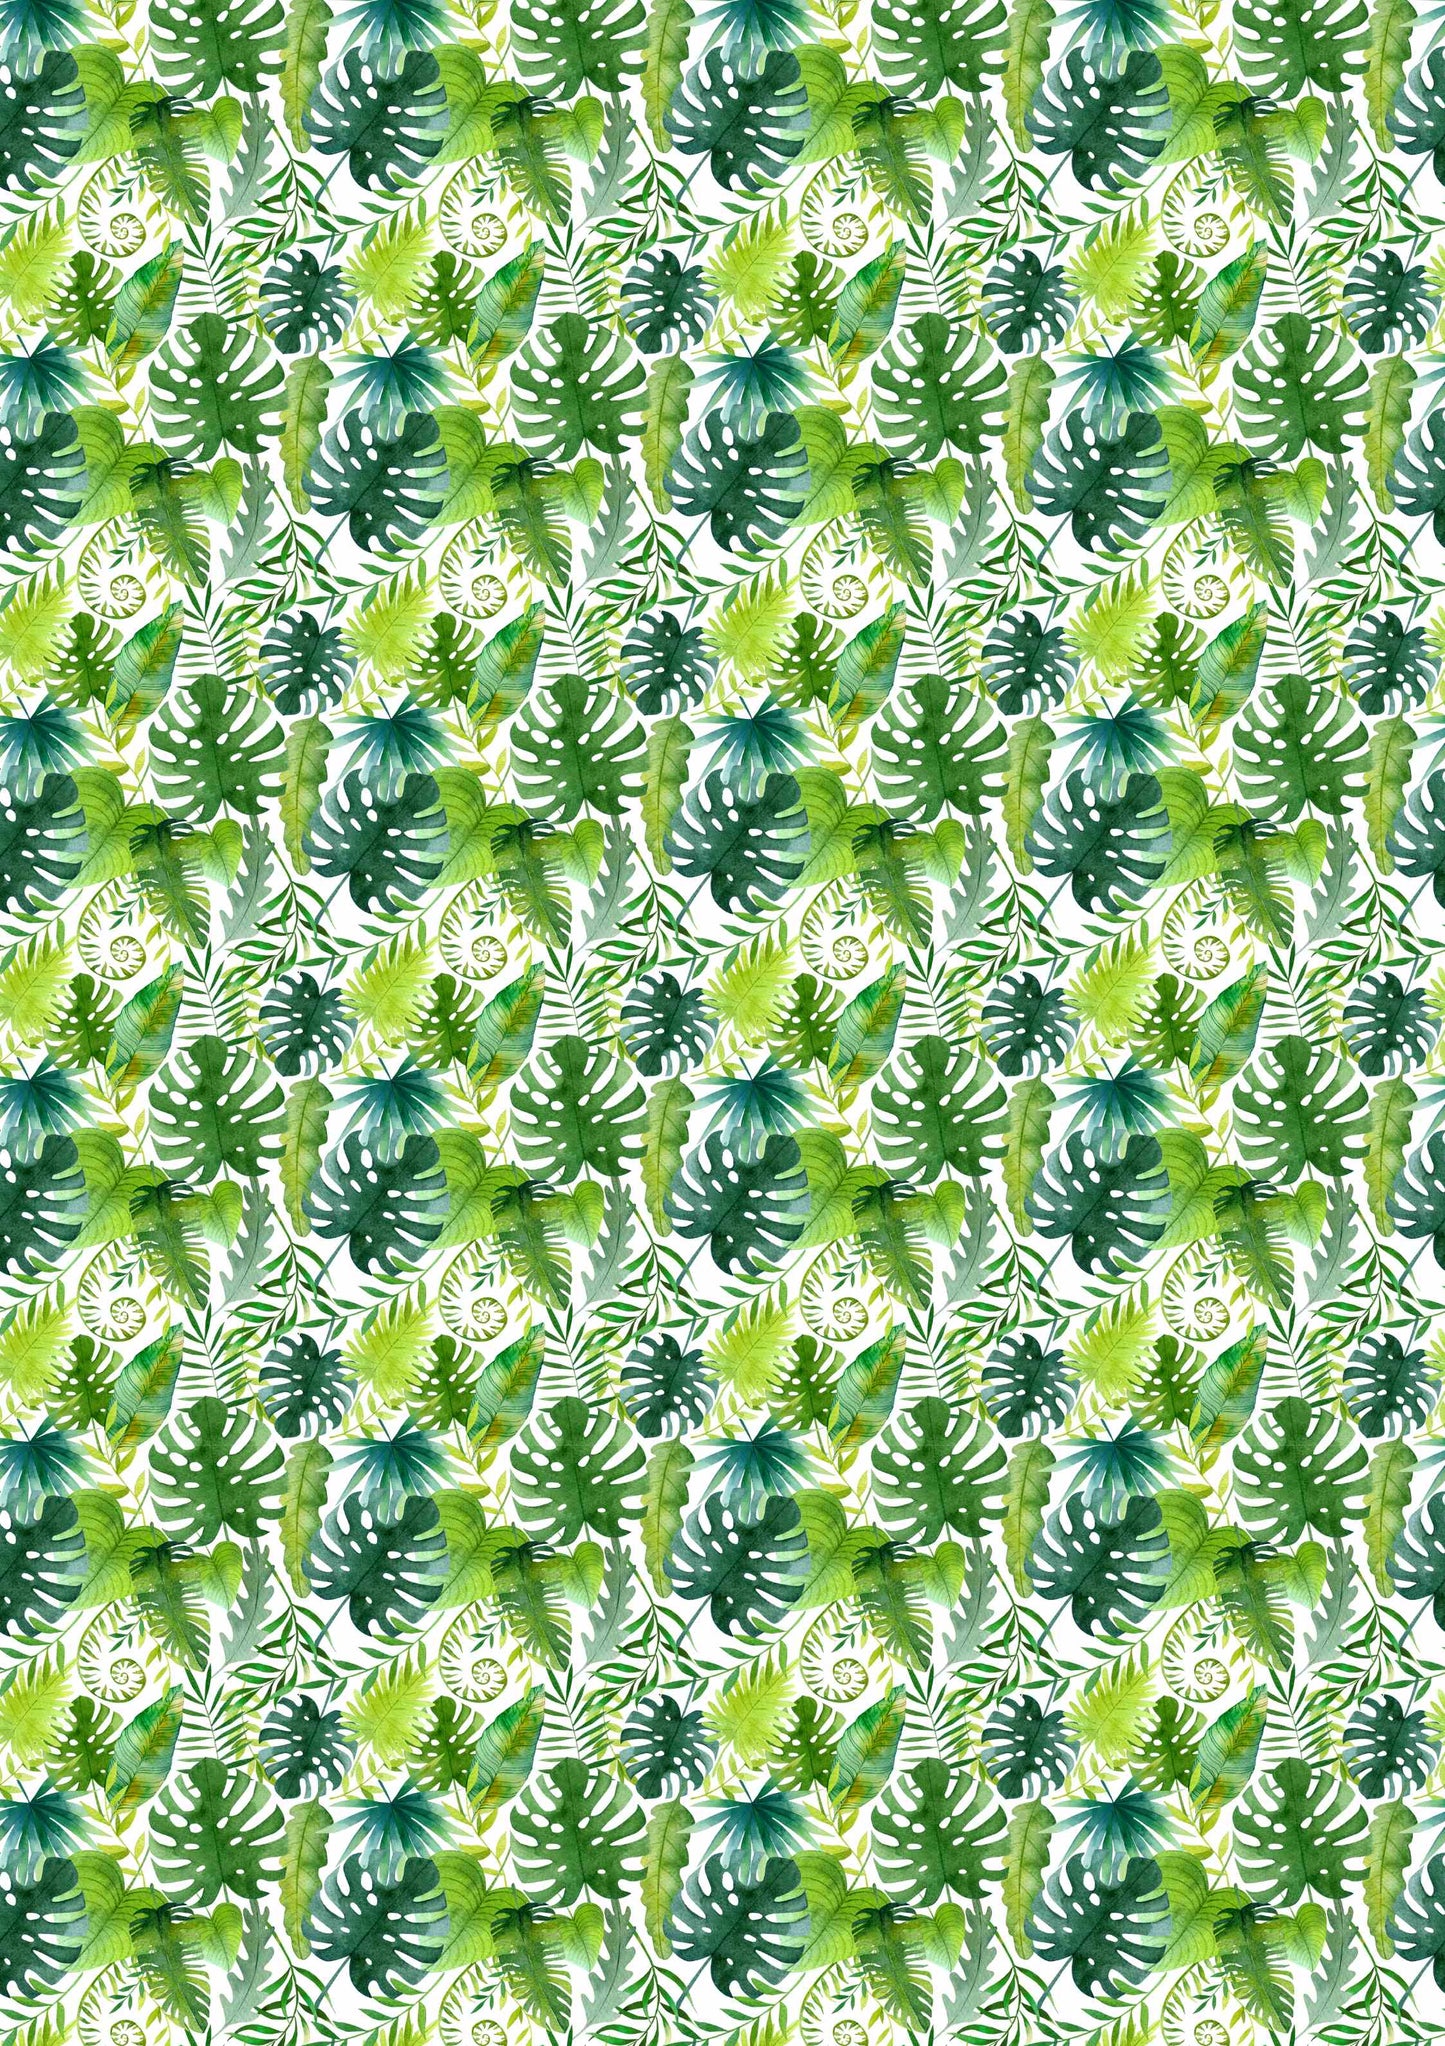 Jungle leaves A1 wrapping paper